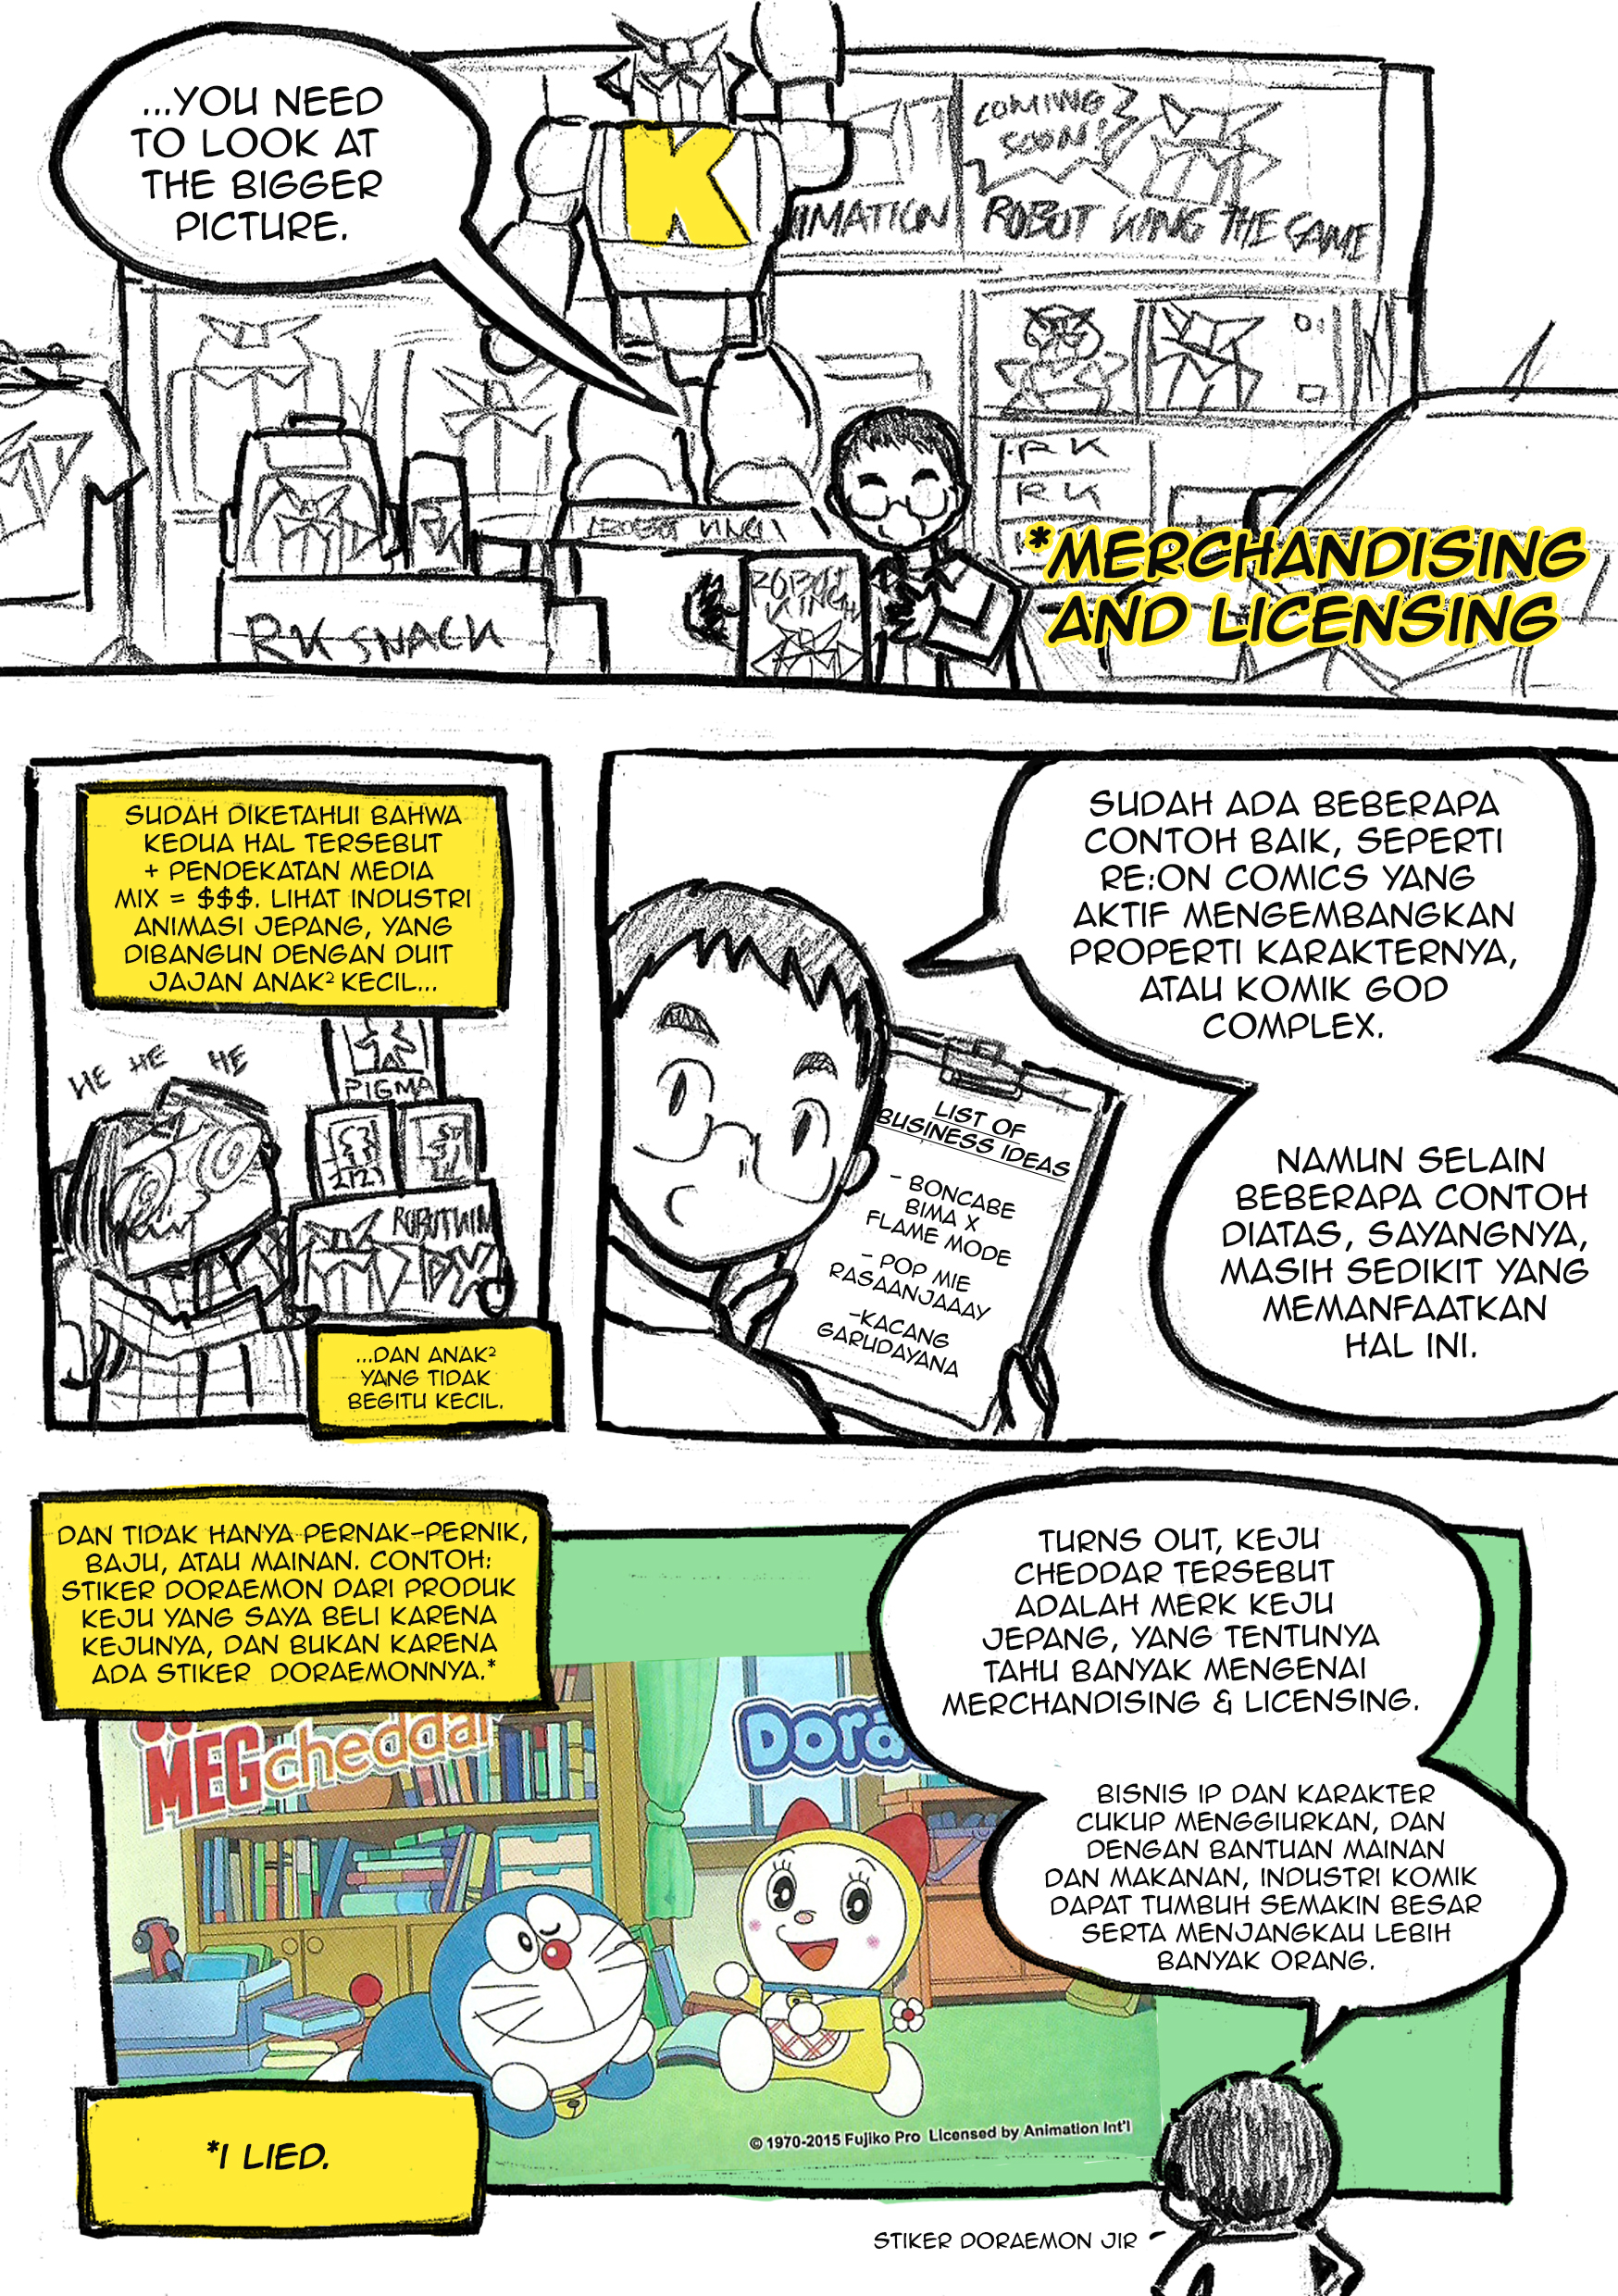 Popcon Asia 2015 Comic Journal Part2 What Next Absolute